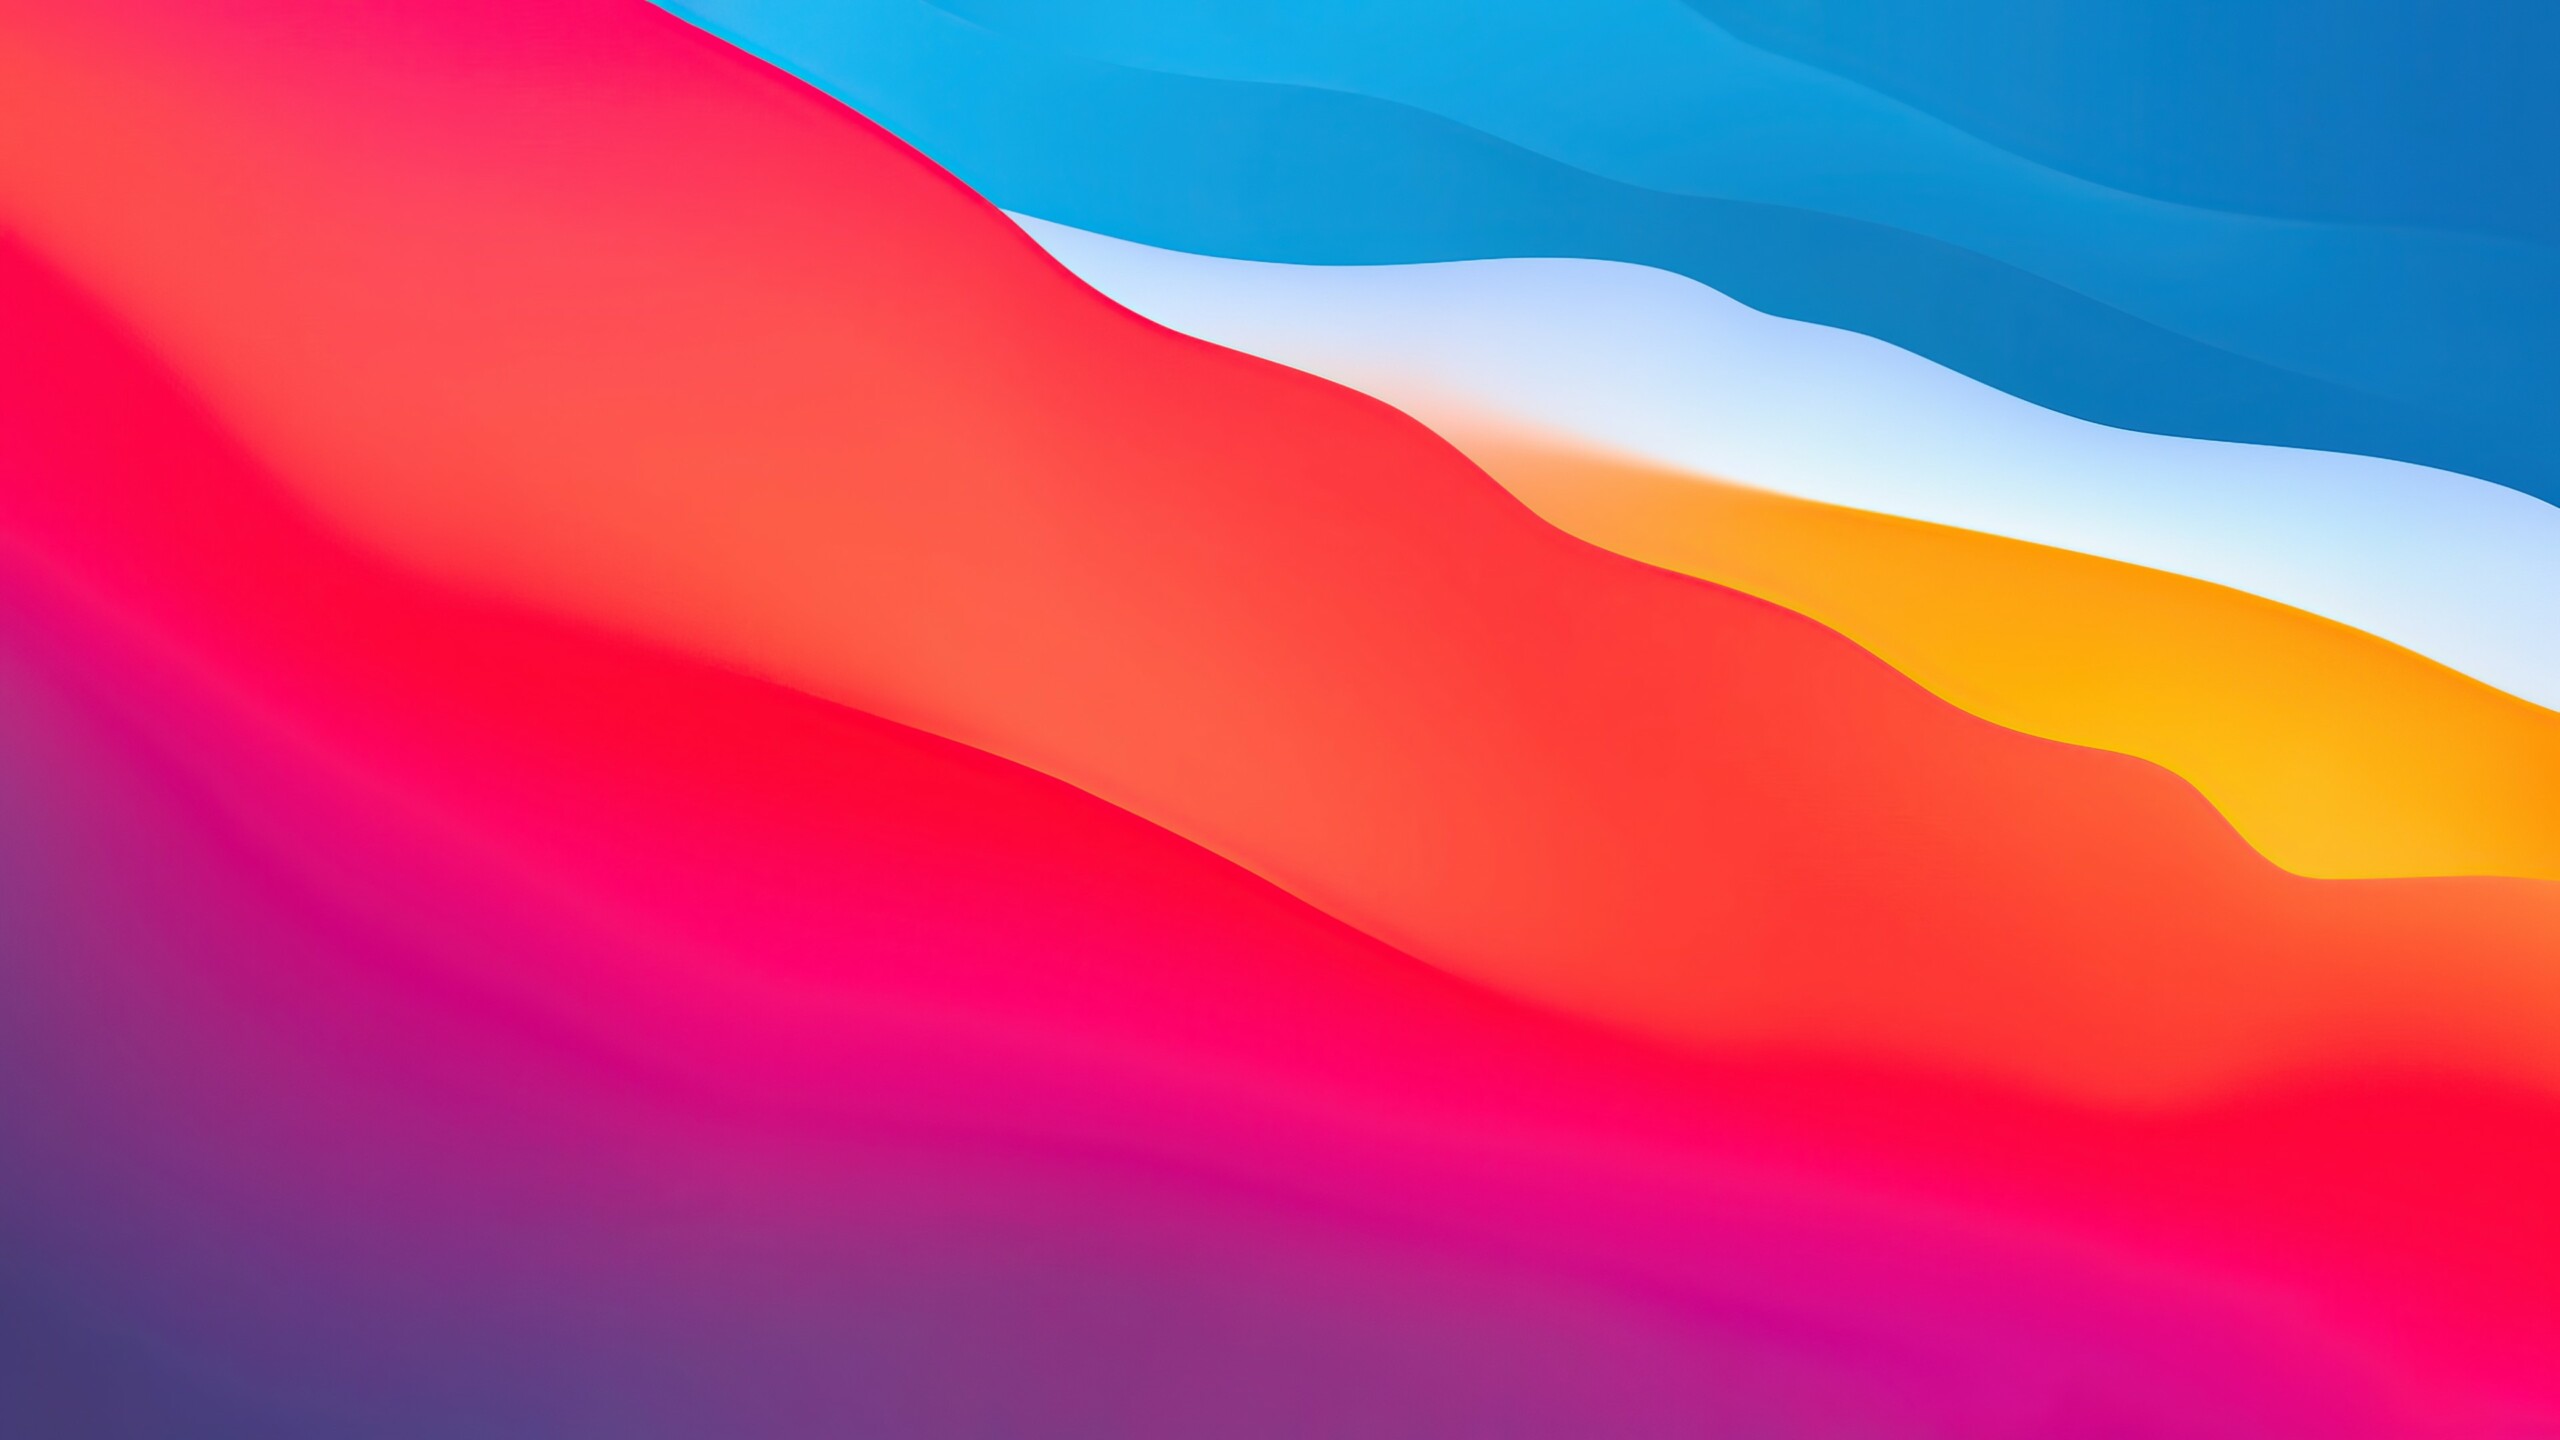 macos-big-sur-apple-layers-fluidic-colorful-wwdc-stock-2020-3840x2160-1455